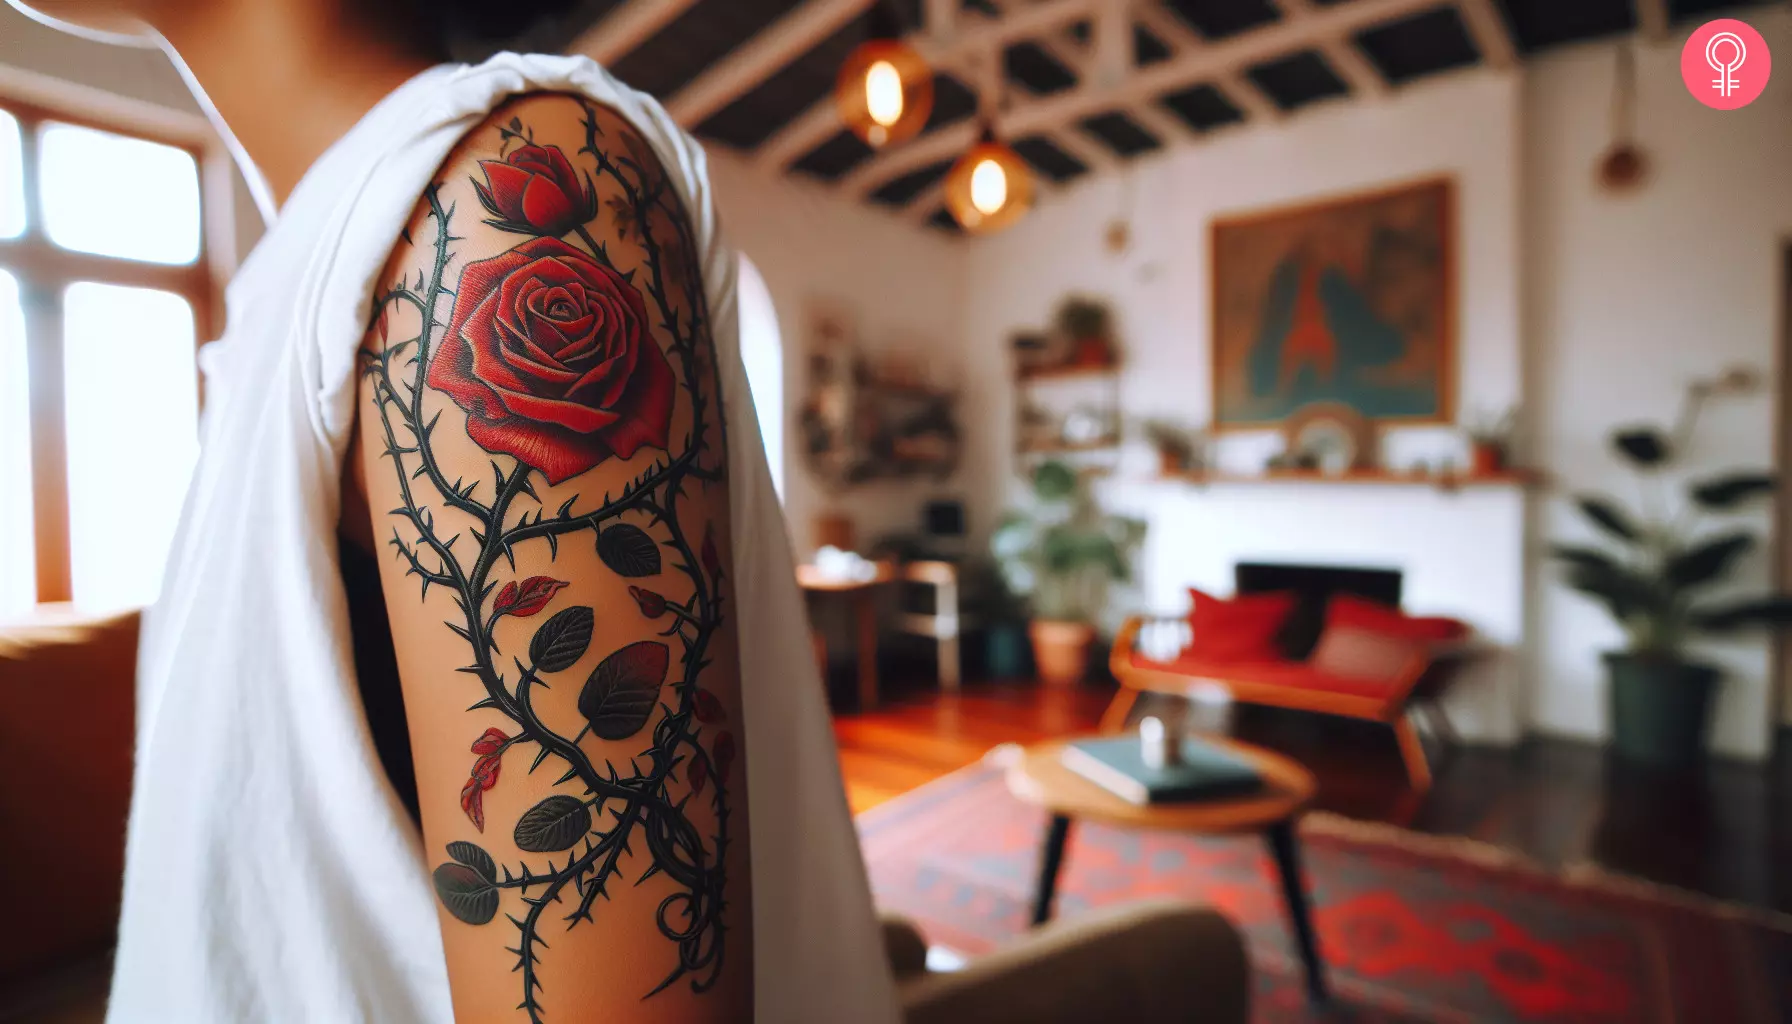 A rose thorn vine tattoo on the upper arm